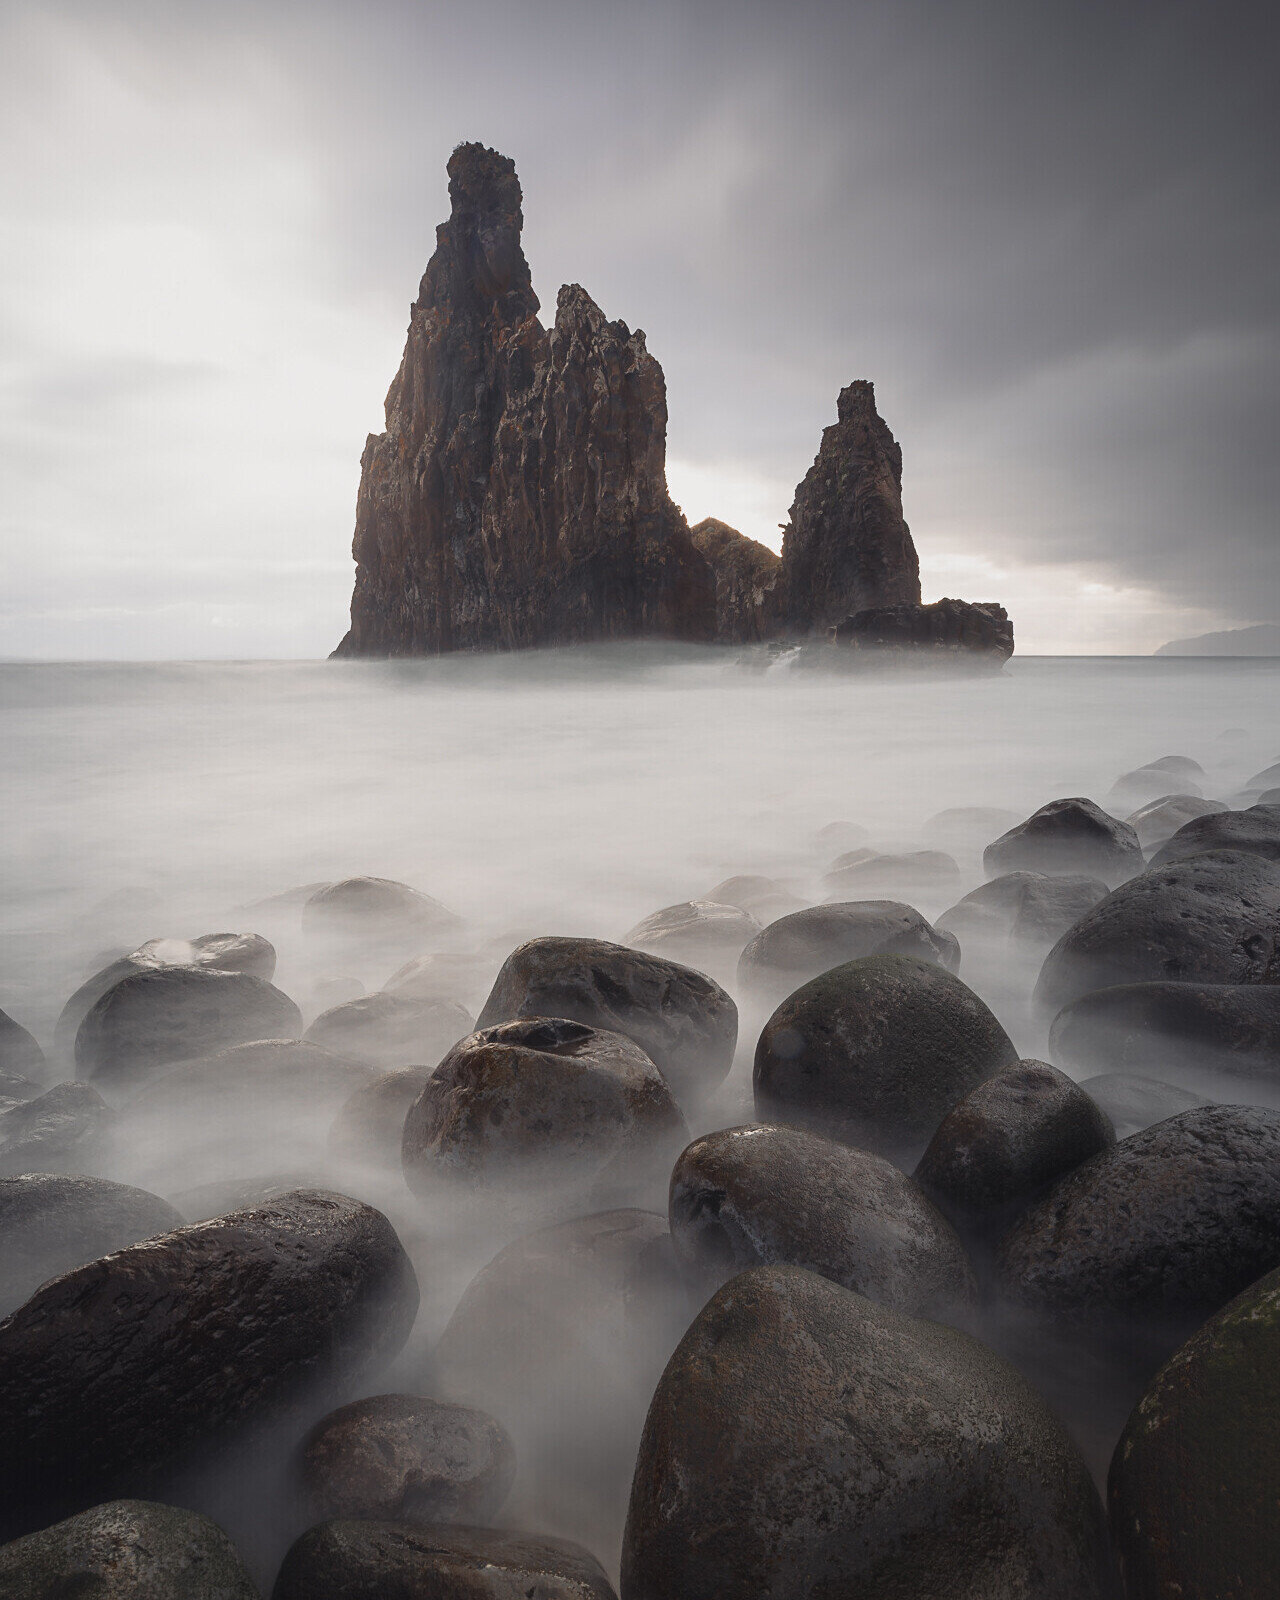 Ilh&eacute;u stands for a 'little island' or 'islander' in portuguese.

To me one of the most fascinating aspects of photography has always been playing with moving water and long exposures. Standing in the raging waters of the Atlantic in northern p